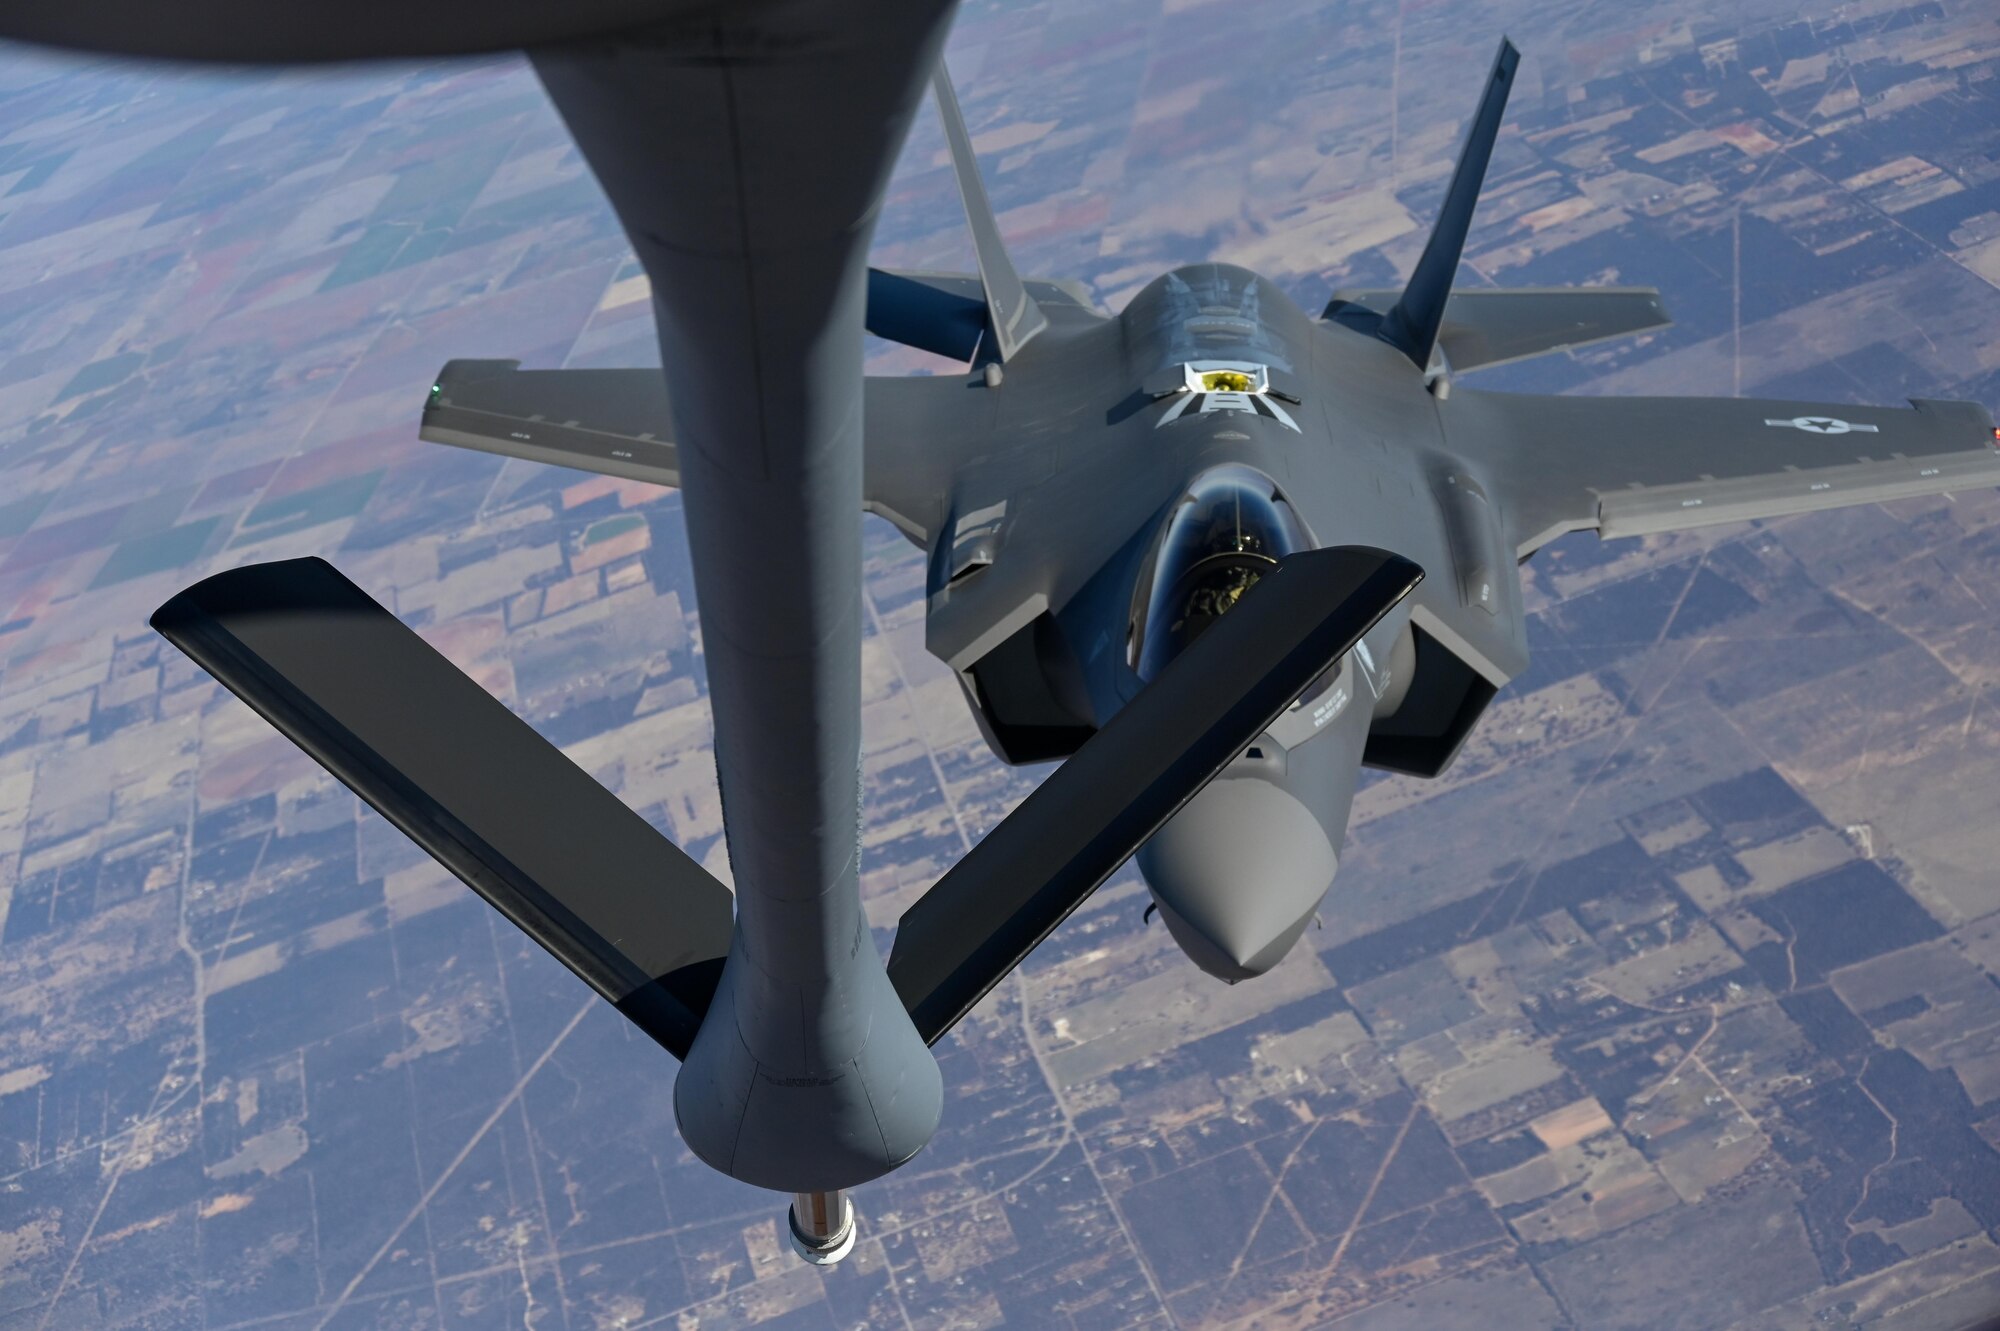 An F-35 Lightning II from the Defense Contract Maintenance Agency conducts its first flight and first tanking with a KC-135R Stratotanker from the 465th Air Refueling Squadron, Tinker Air Force Base, Oklahoma, Feb. 24, 2021. Once fully tested this F-35 will join the fleet at Eielson Air Force Base, Alaska. (U.S. Air Force photo by Senior Airman Mary Begy)